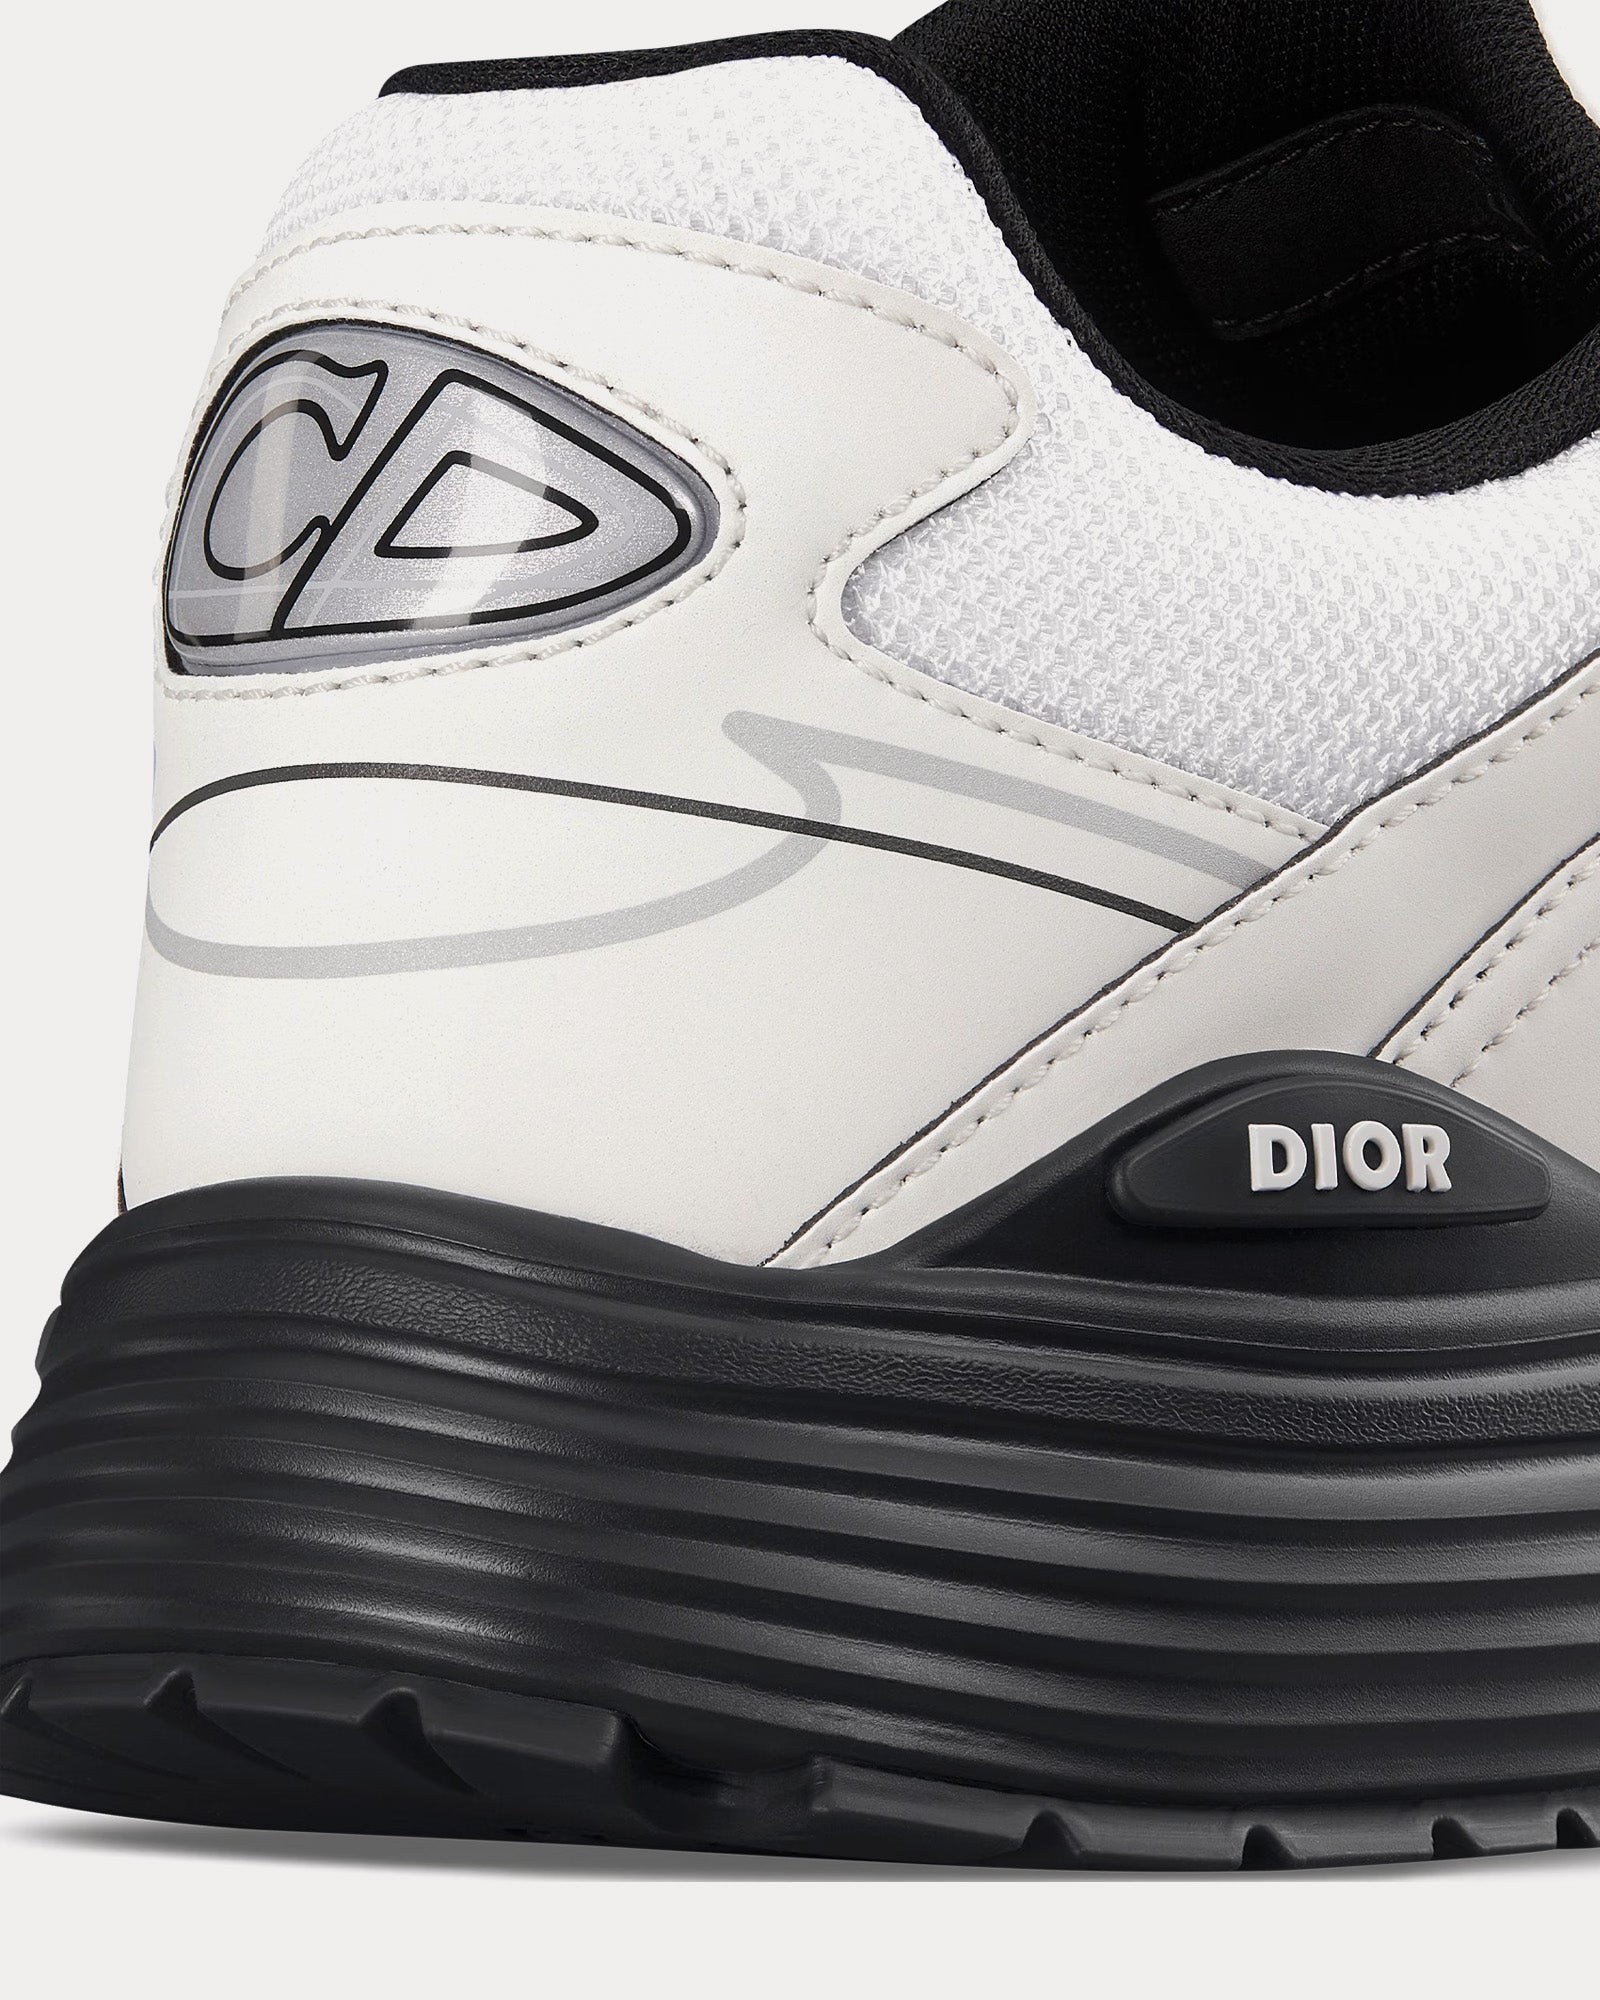 Dior - B30 Mesh & Technical Fabric White Low Top Sneakers